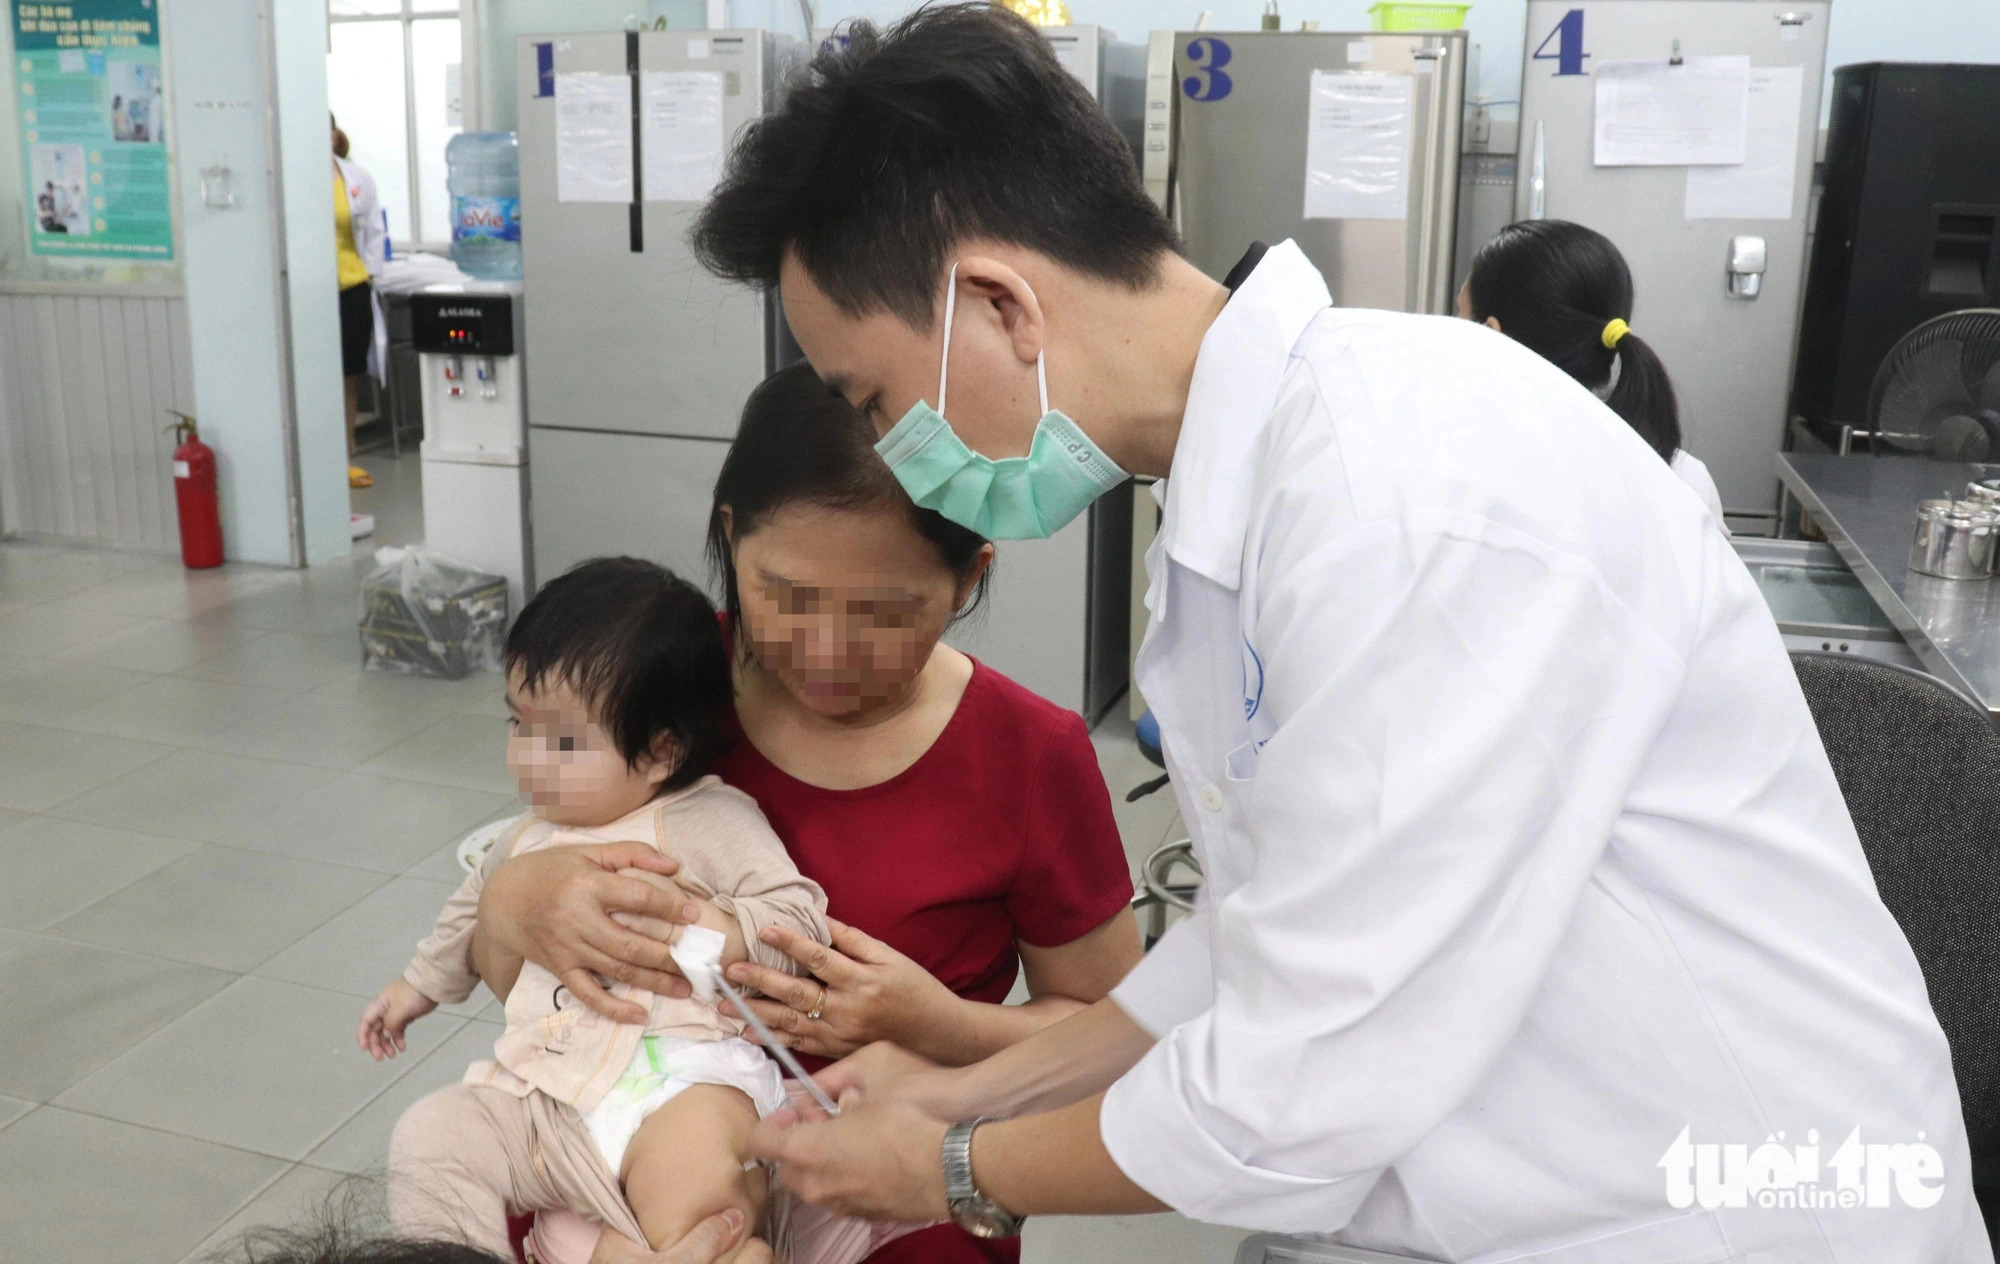 Millions of children in Vietnam protected by vaccination over 4 decades: UN agencies